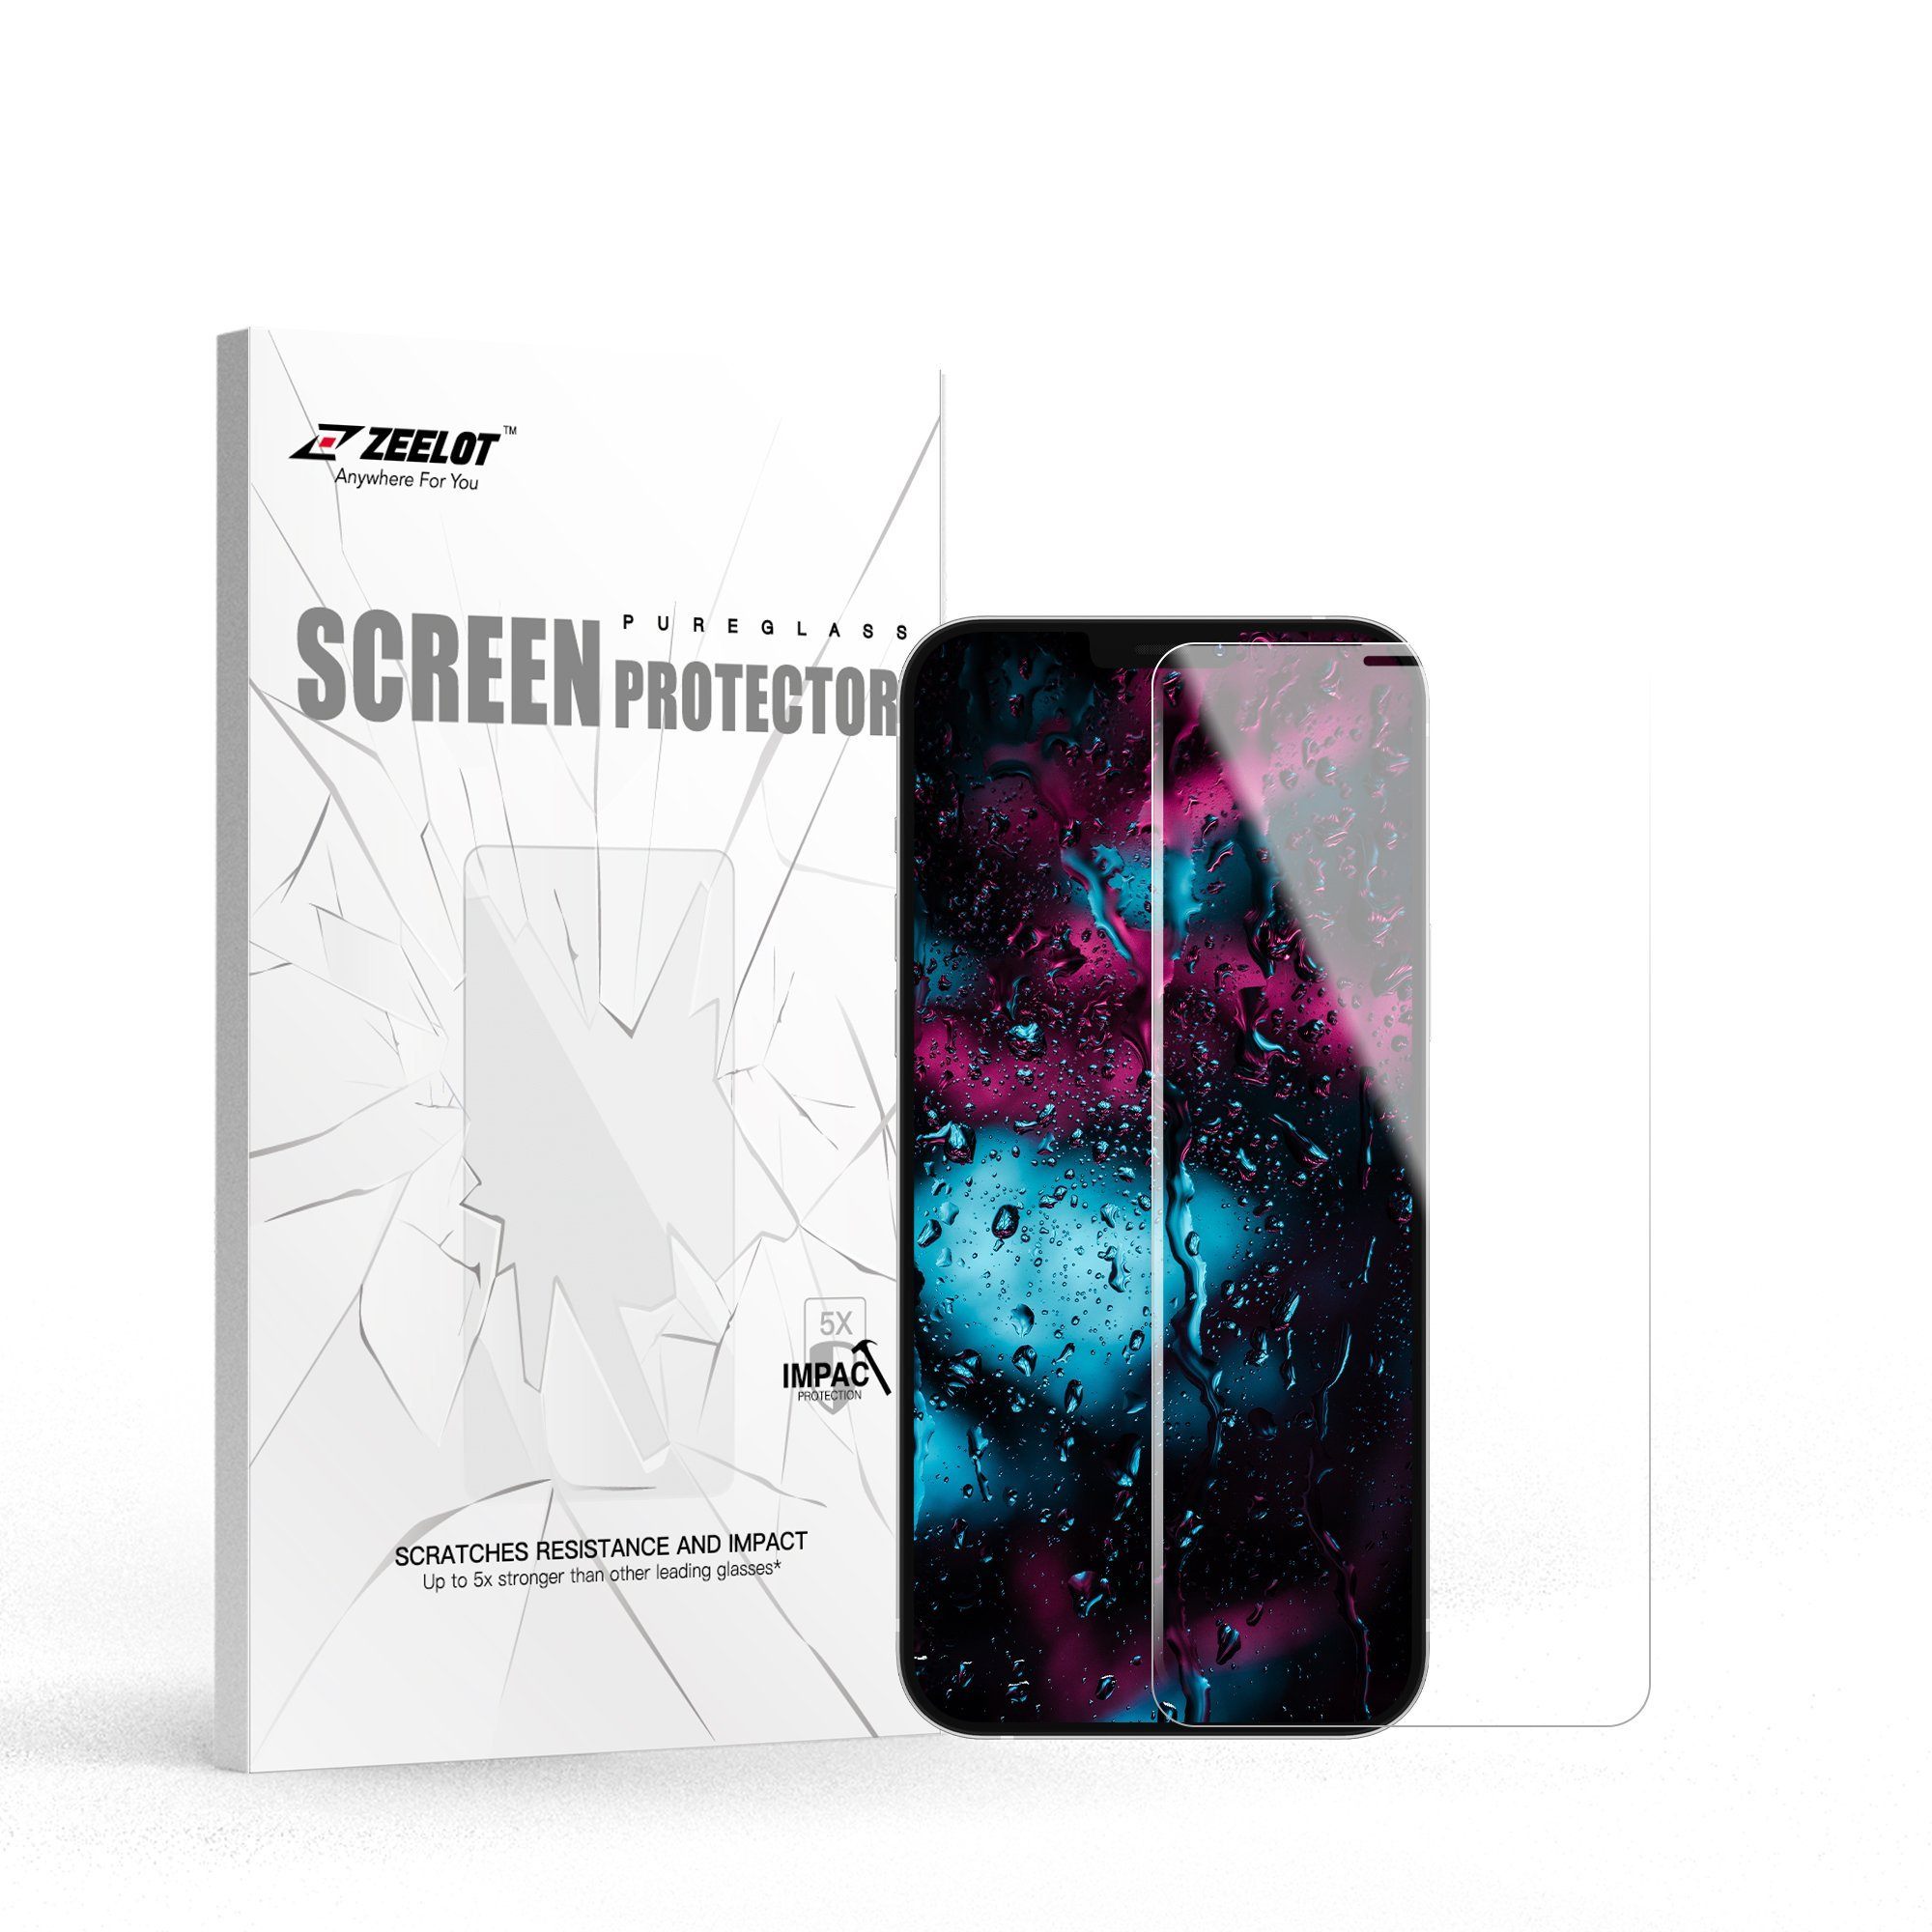 ZEELOT PureGlass Stereoscopic Steel Wire Tempered Glass Screen Protector for iPhone 12 Pro Max 6.7" (2020), Clear iPhone 12 Pro Max ZEELOT 